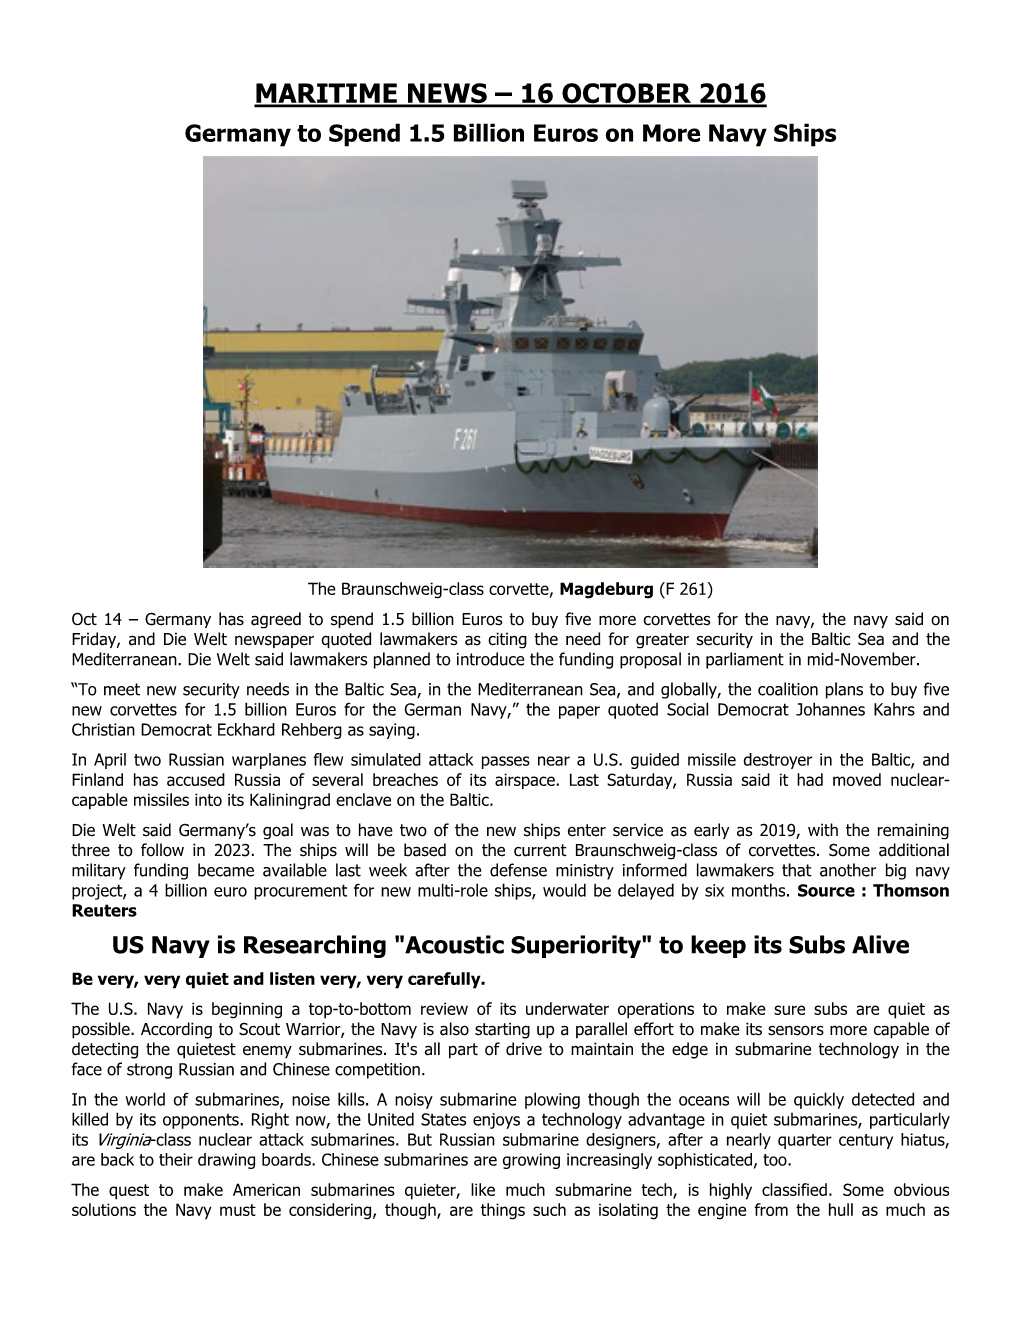 MARITIME NEWS – 16 OCTOBER 2016 Germany to Spend 1.5 Billion Euros on More Navy Ships